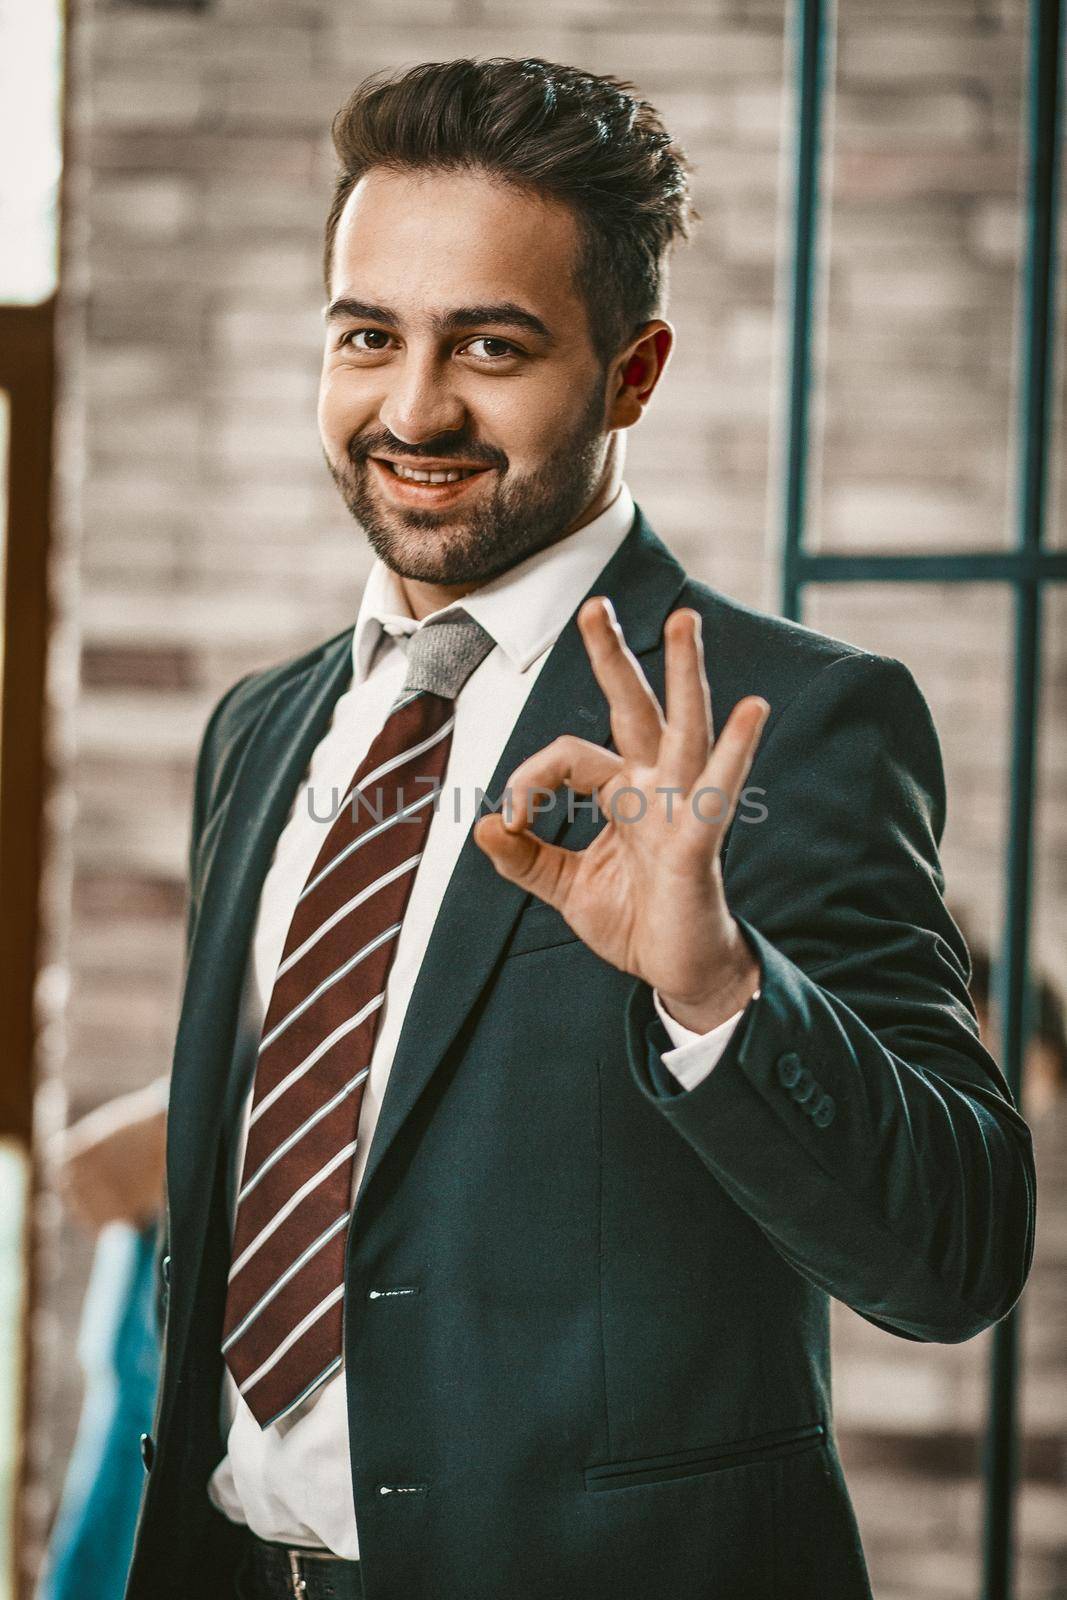 Successful Businessman Shows Okey Gesture, Portrait Of Well-Dressed Bearded Man In Dark Suit Gesturing Ok Sign. Selective Focus On Male Smiling Face, Toned Image